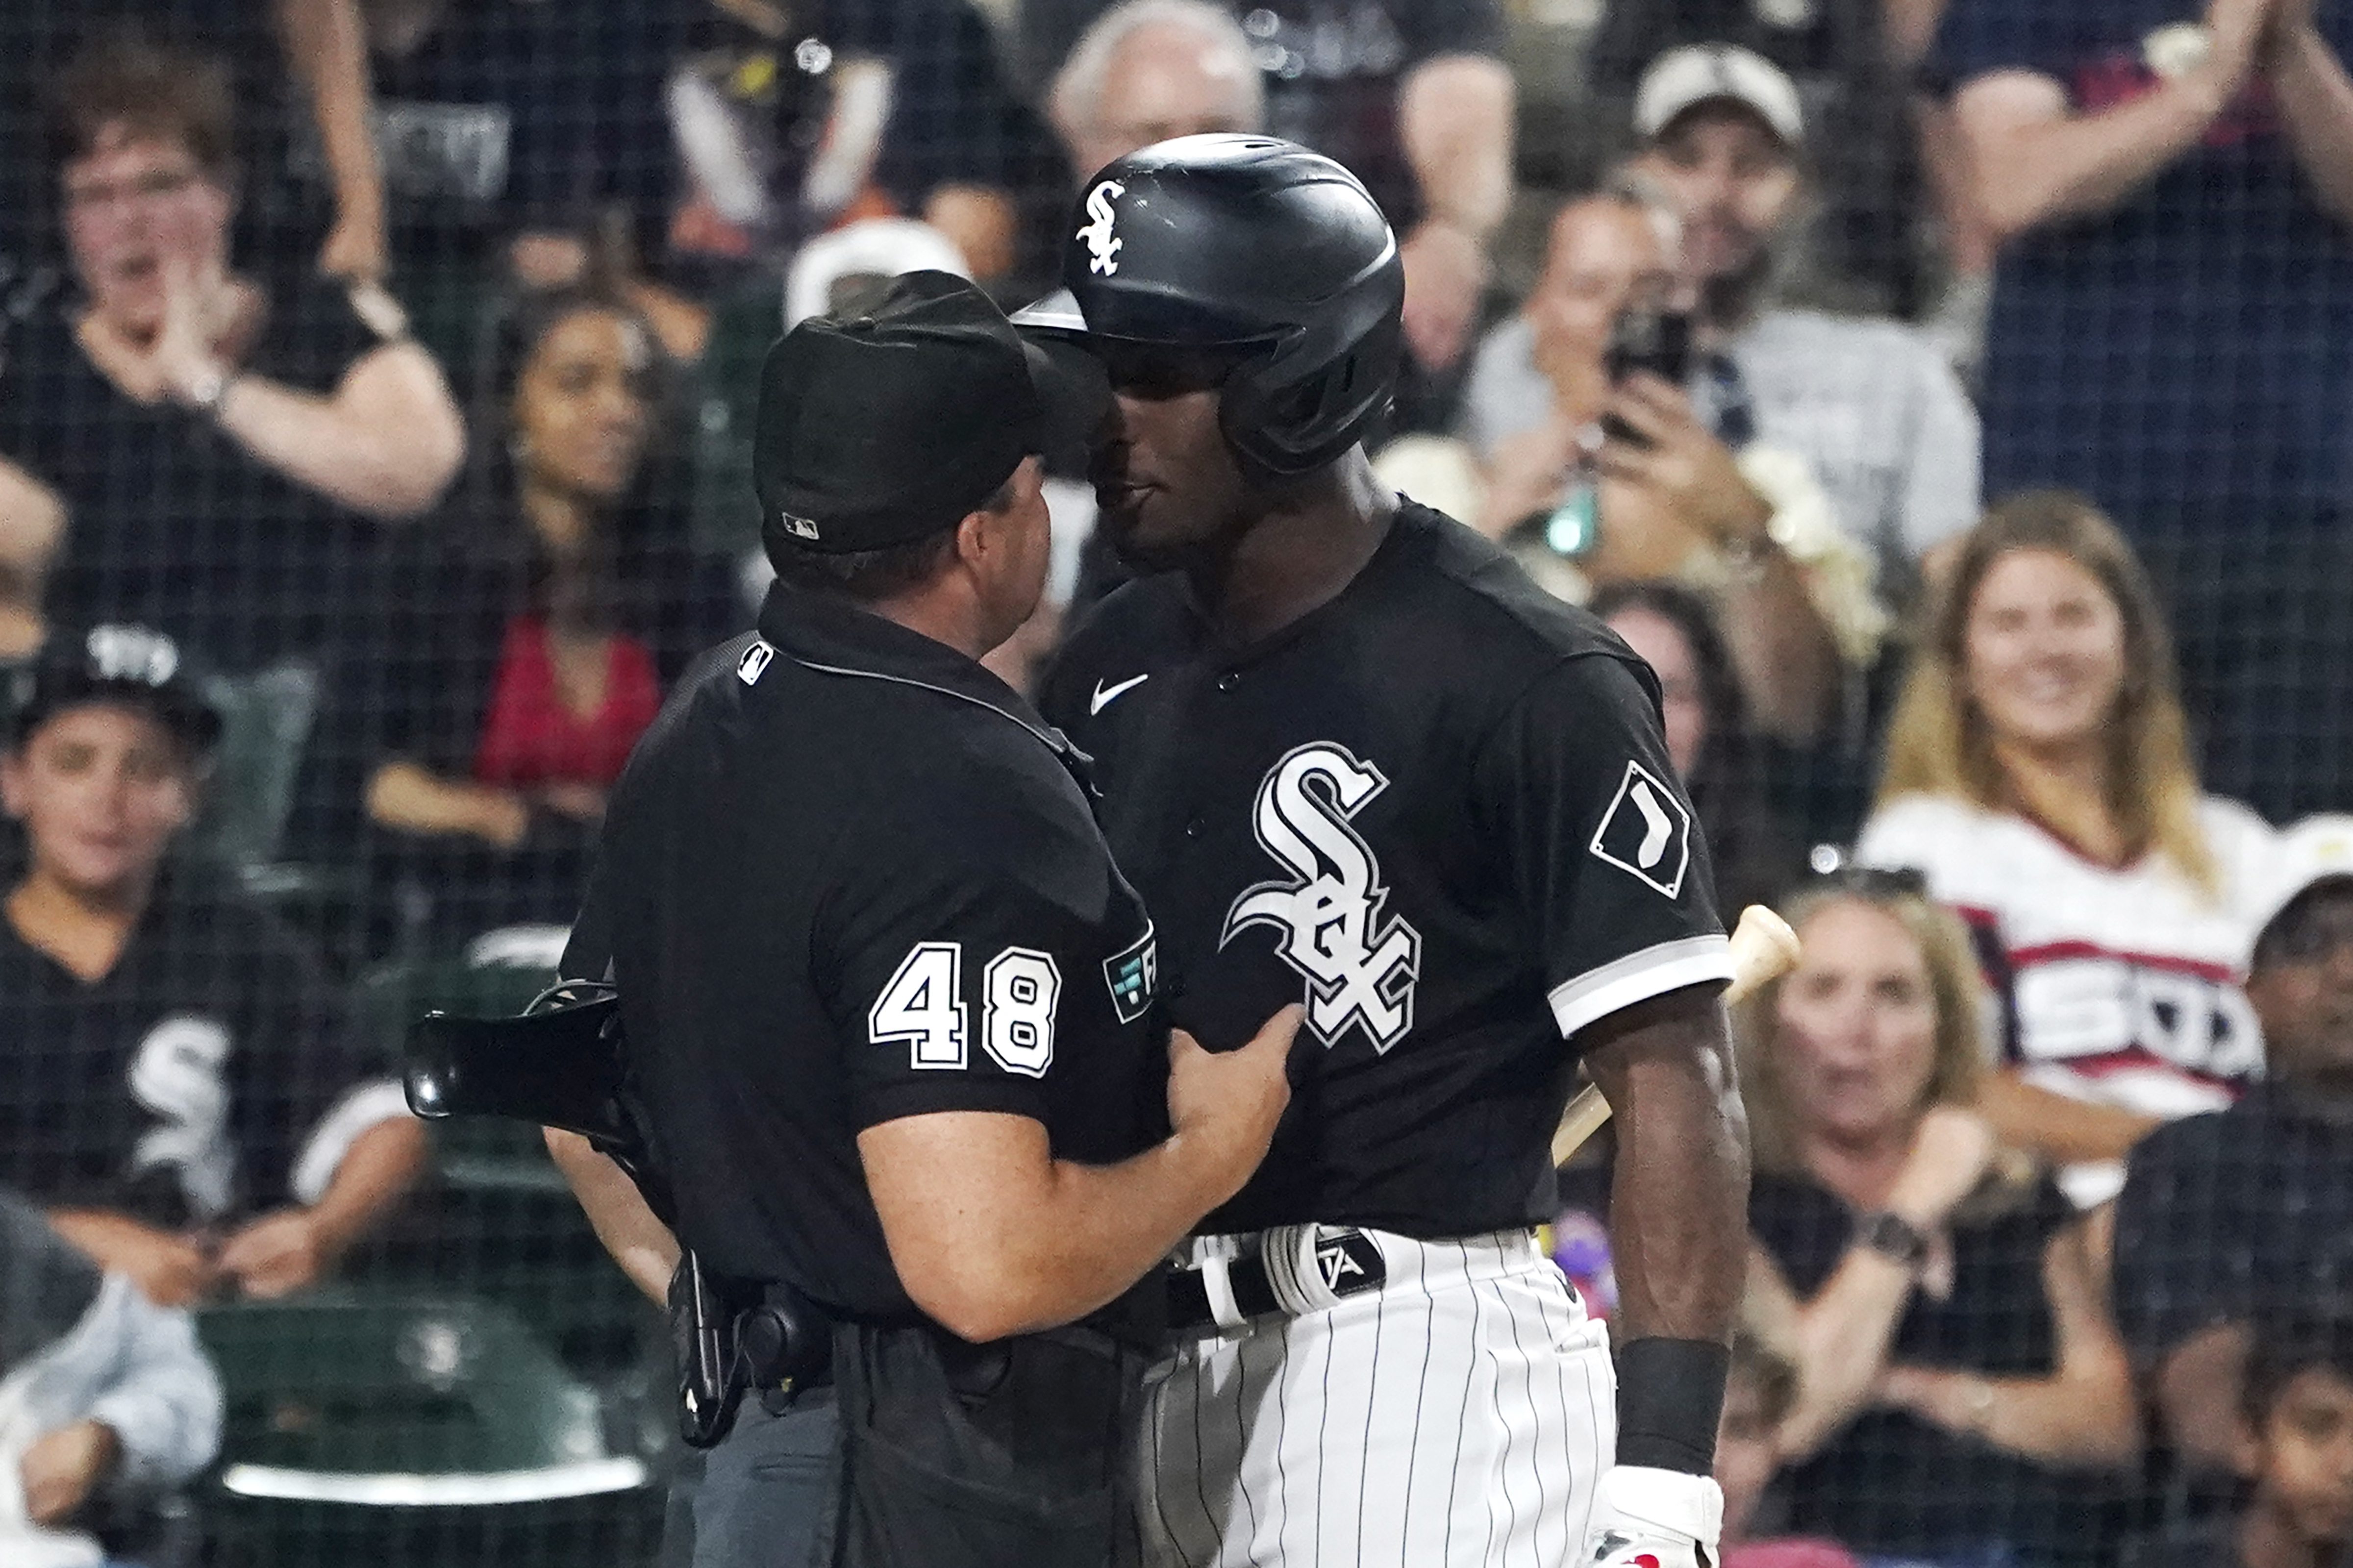 Baseball notes: MLB suspends Chicago's Tim Anderson 6 games